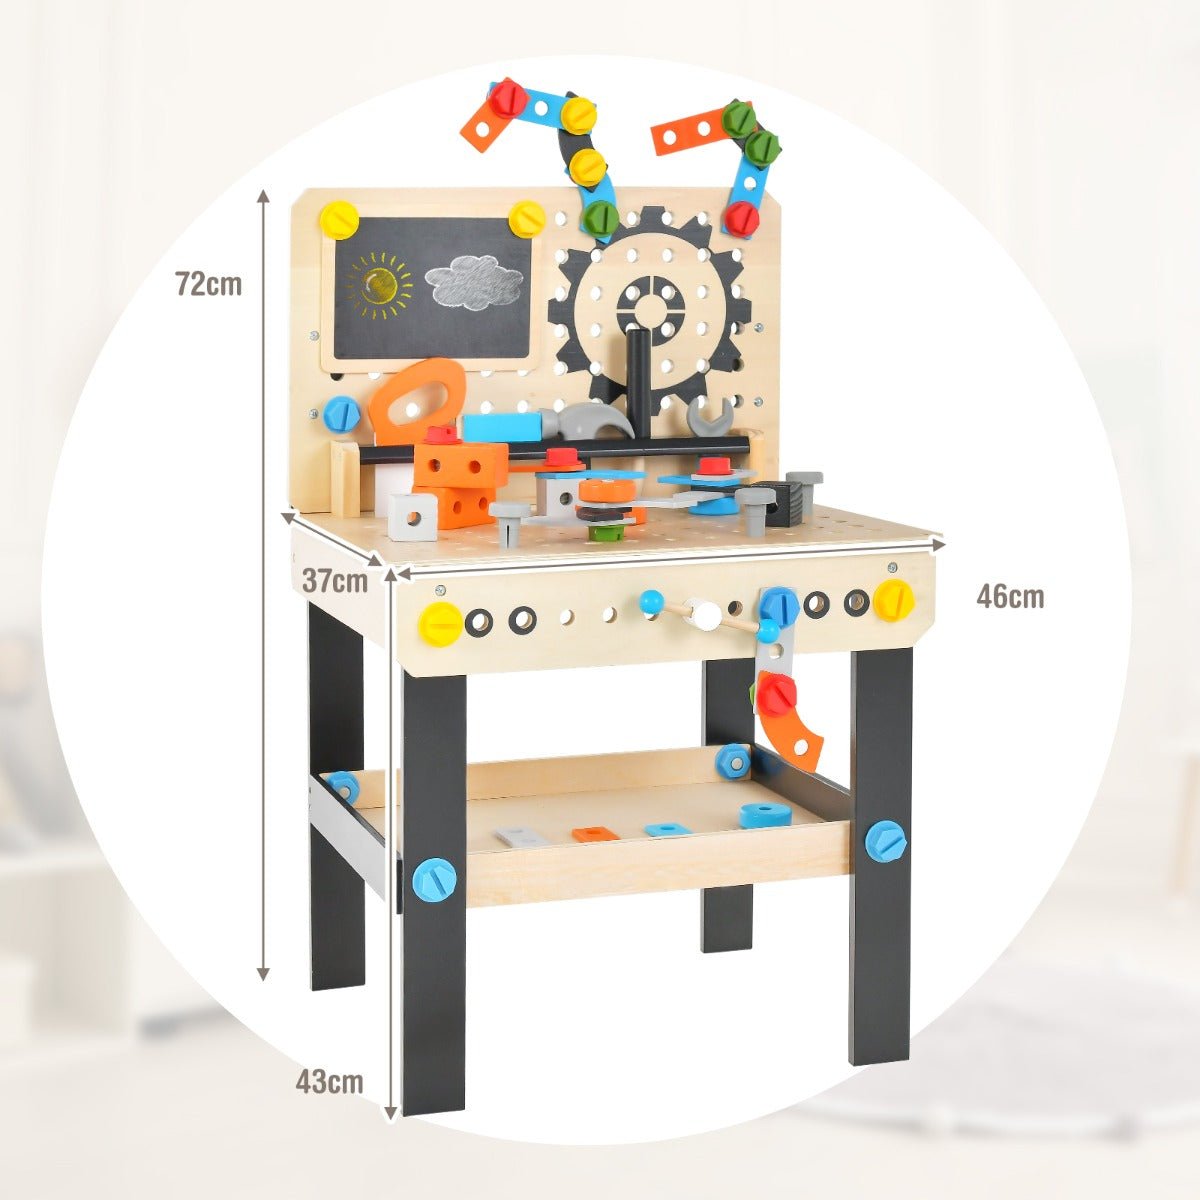 Kids' Crafting Paradise with Pretend Play Workbench